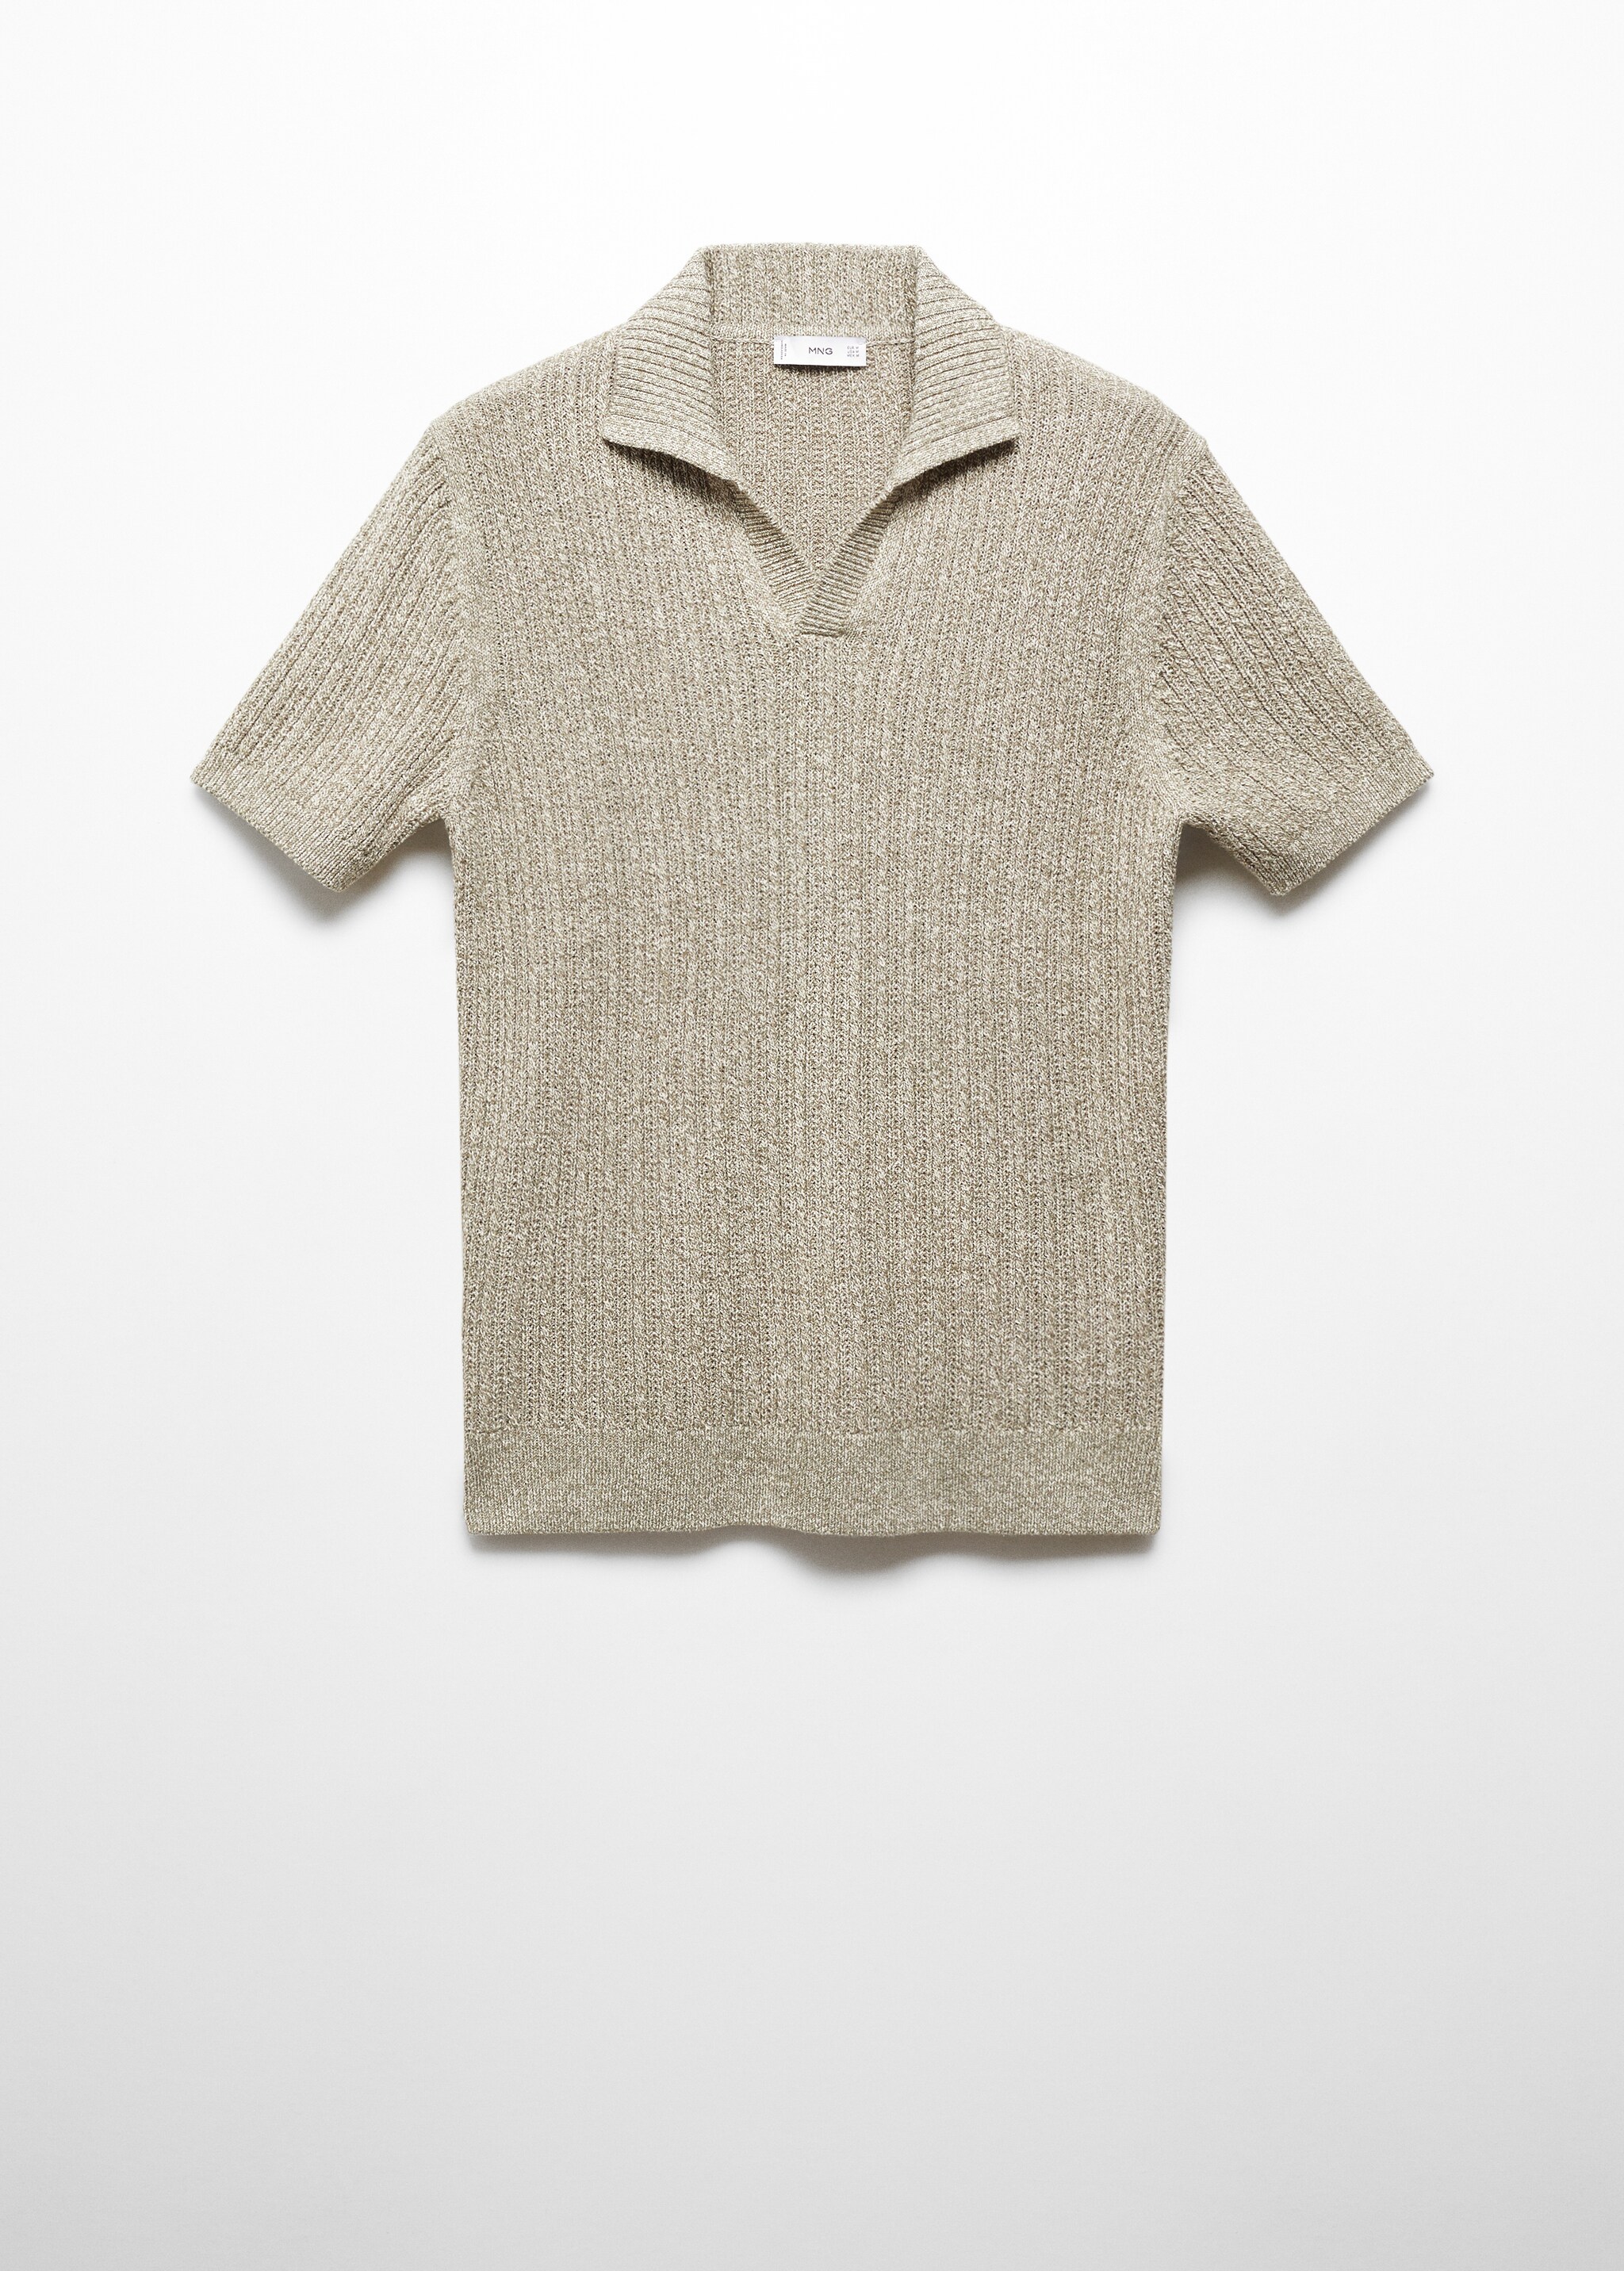 Marbled cotton knit polo shirt - Article without model